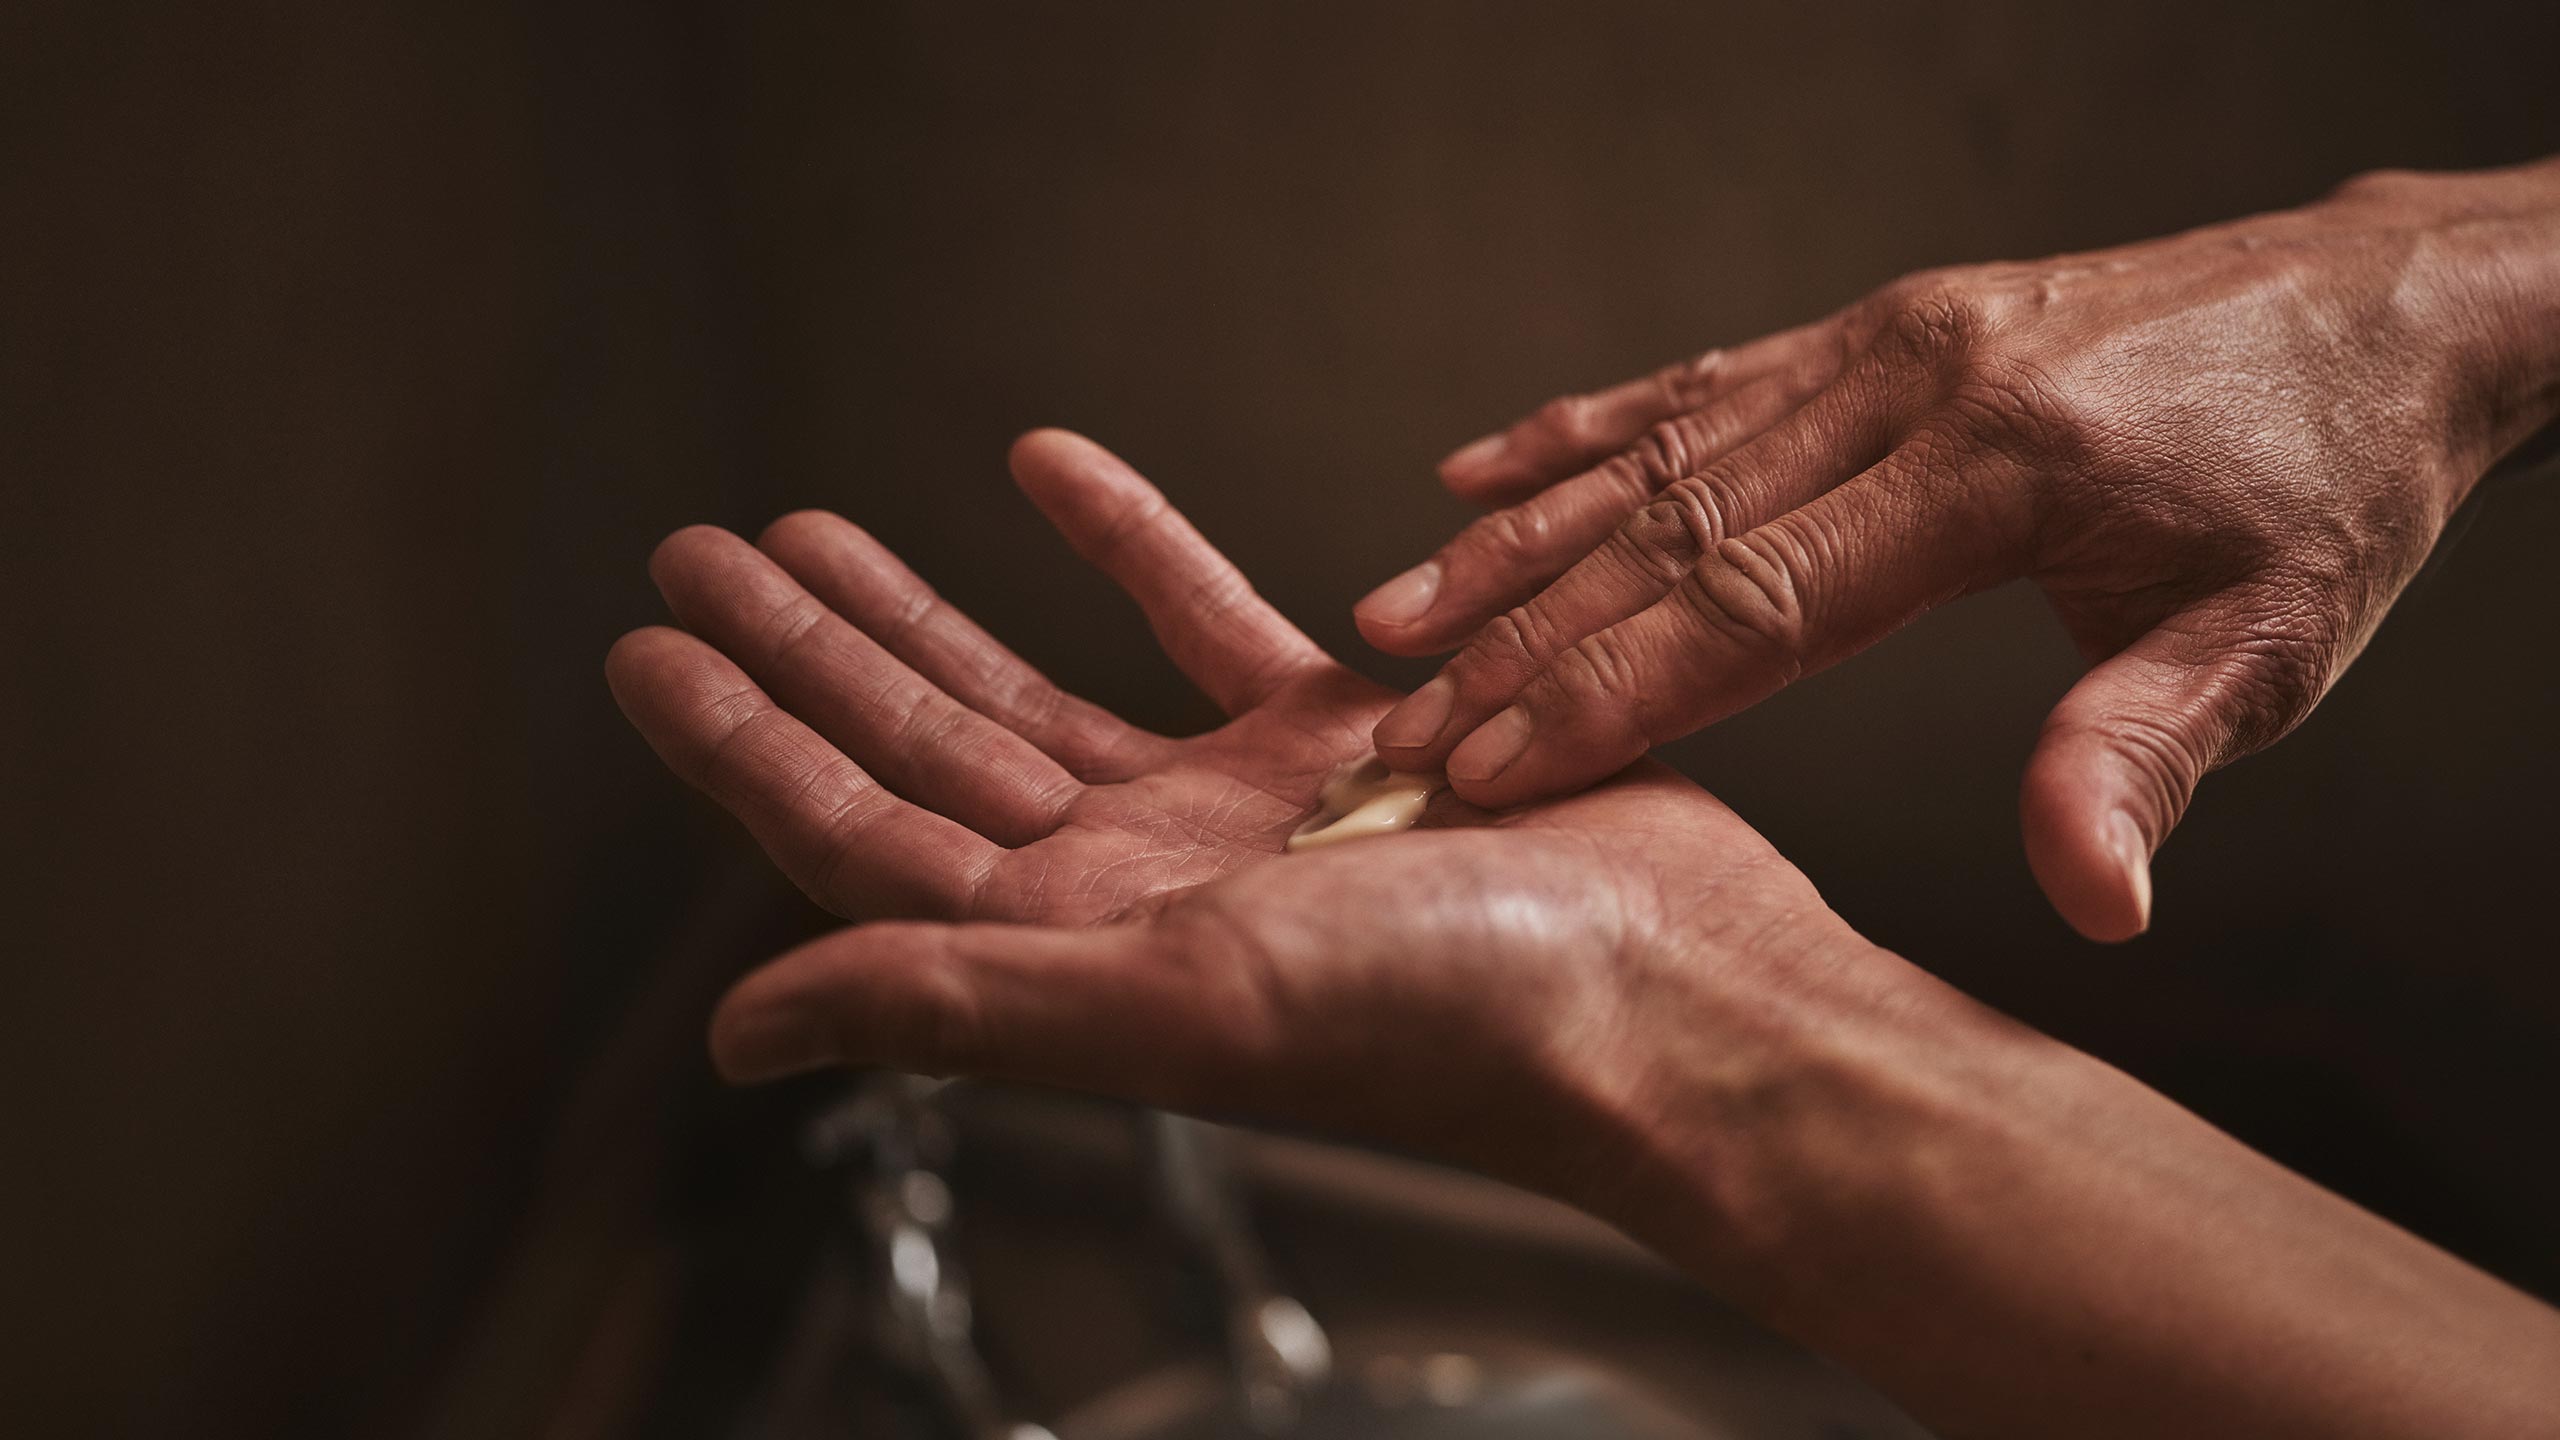 A pair of hands preparing to apply Sublime Replenishing Night Masque.